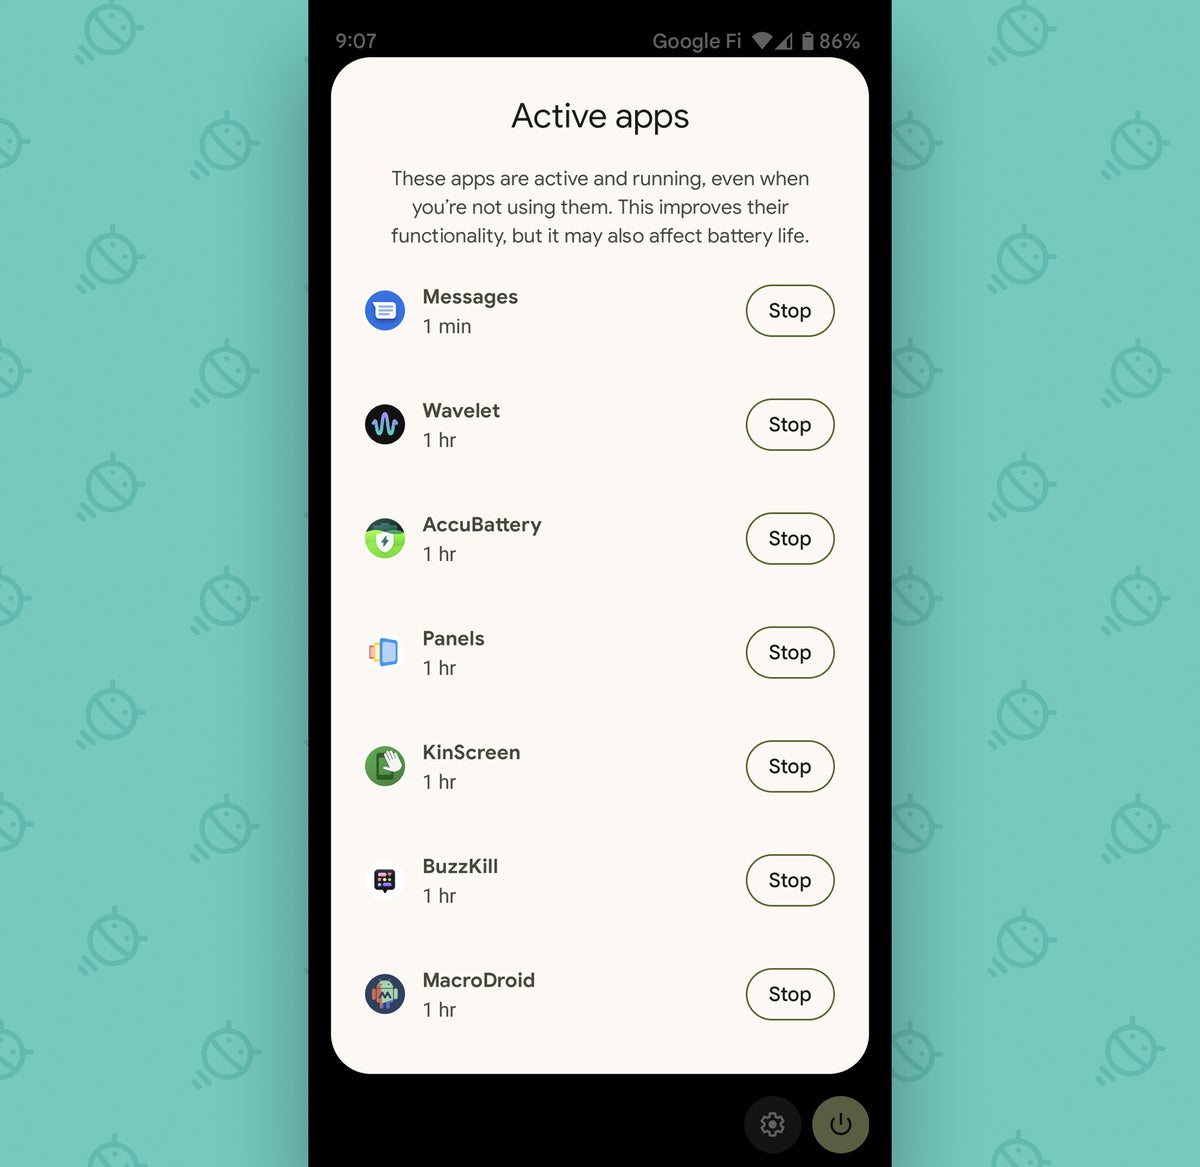 Android 13, Google Pixel: Active apps list